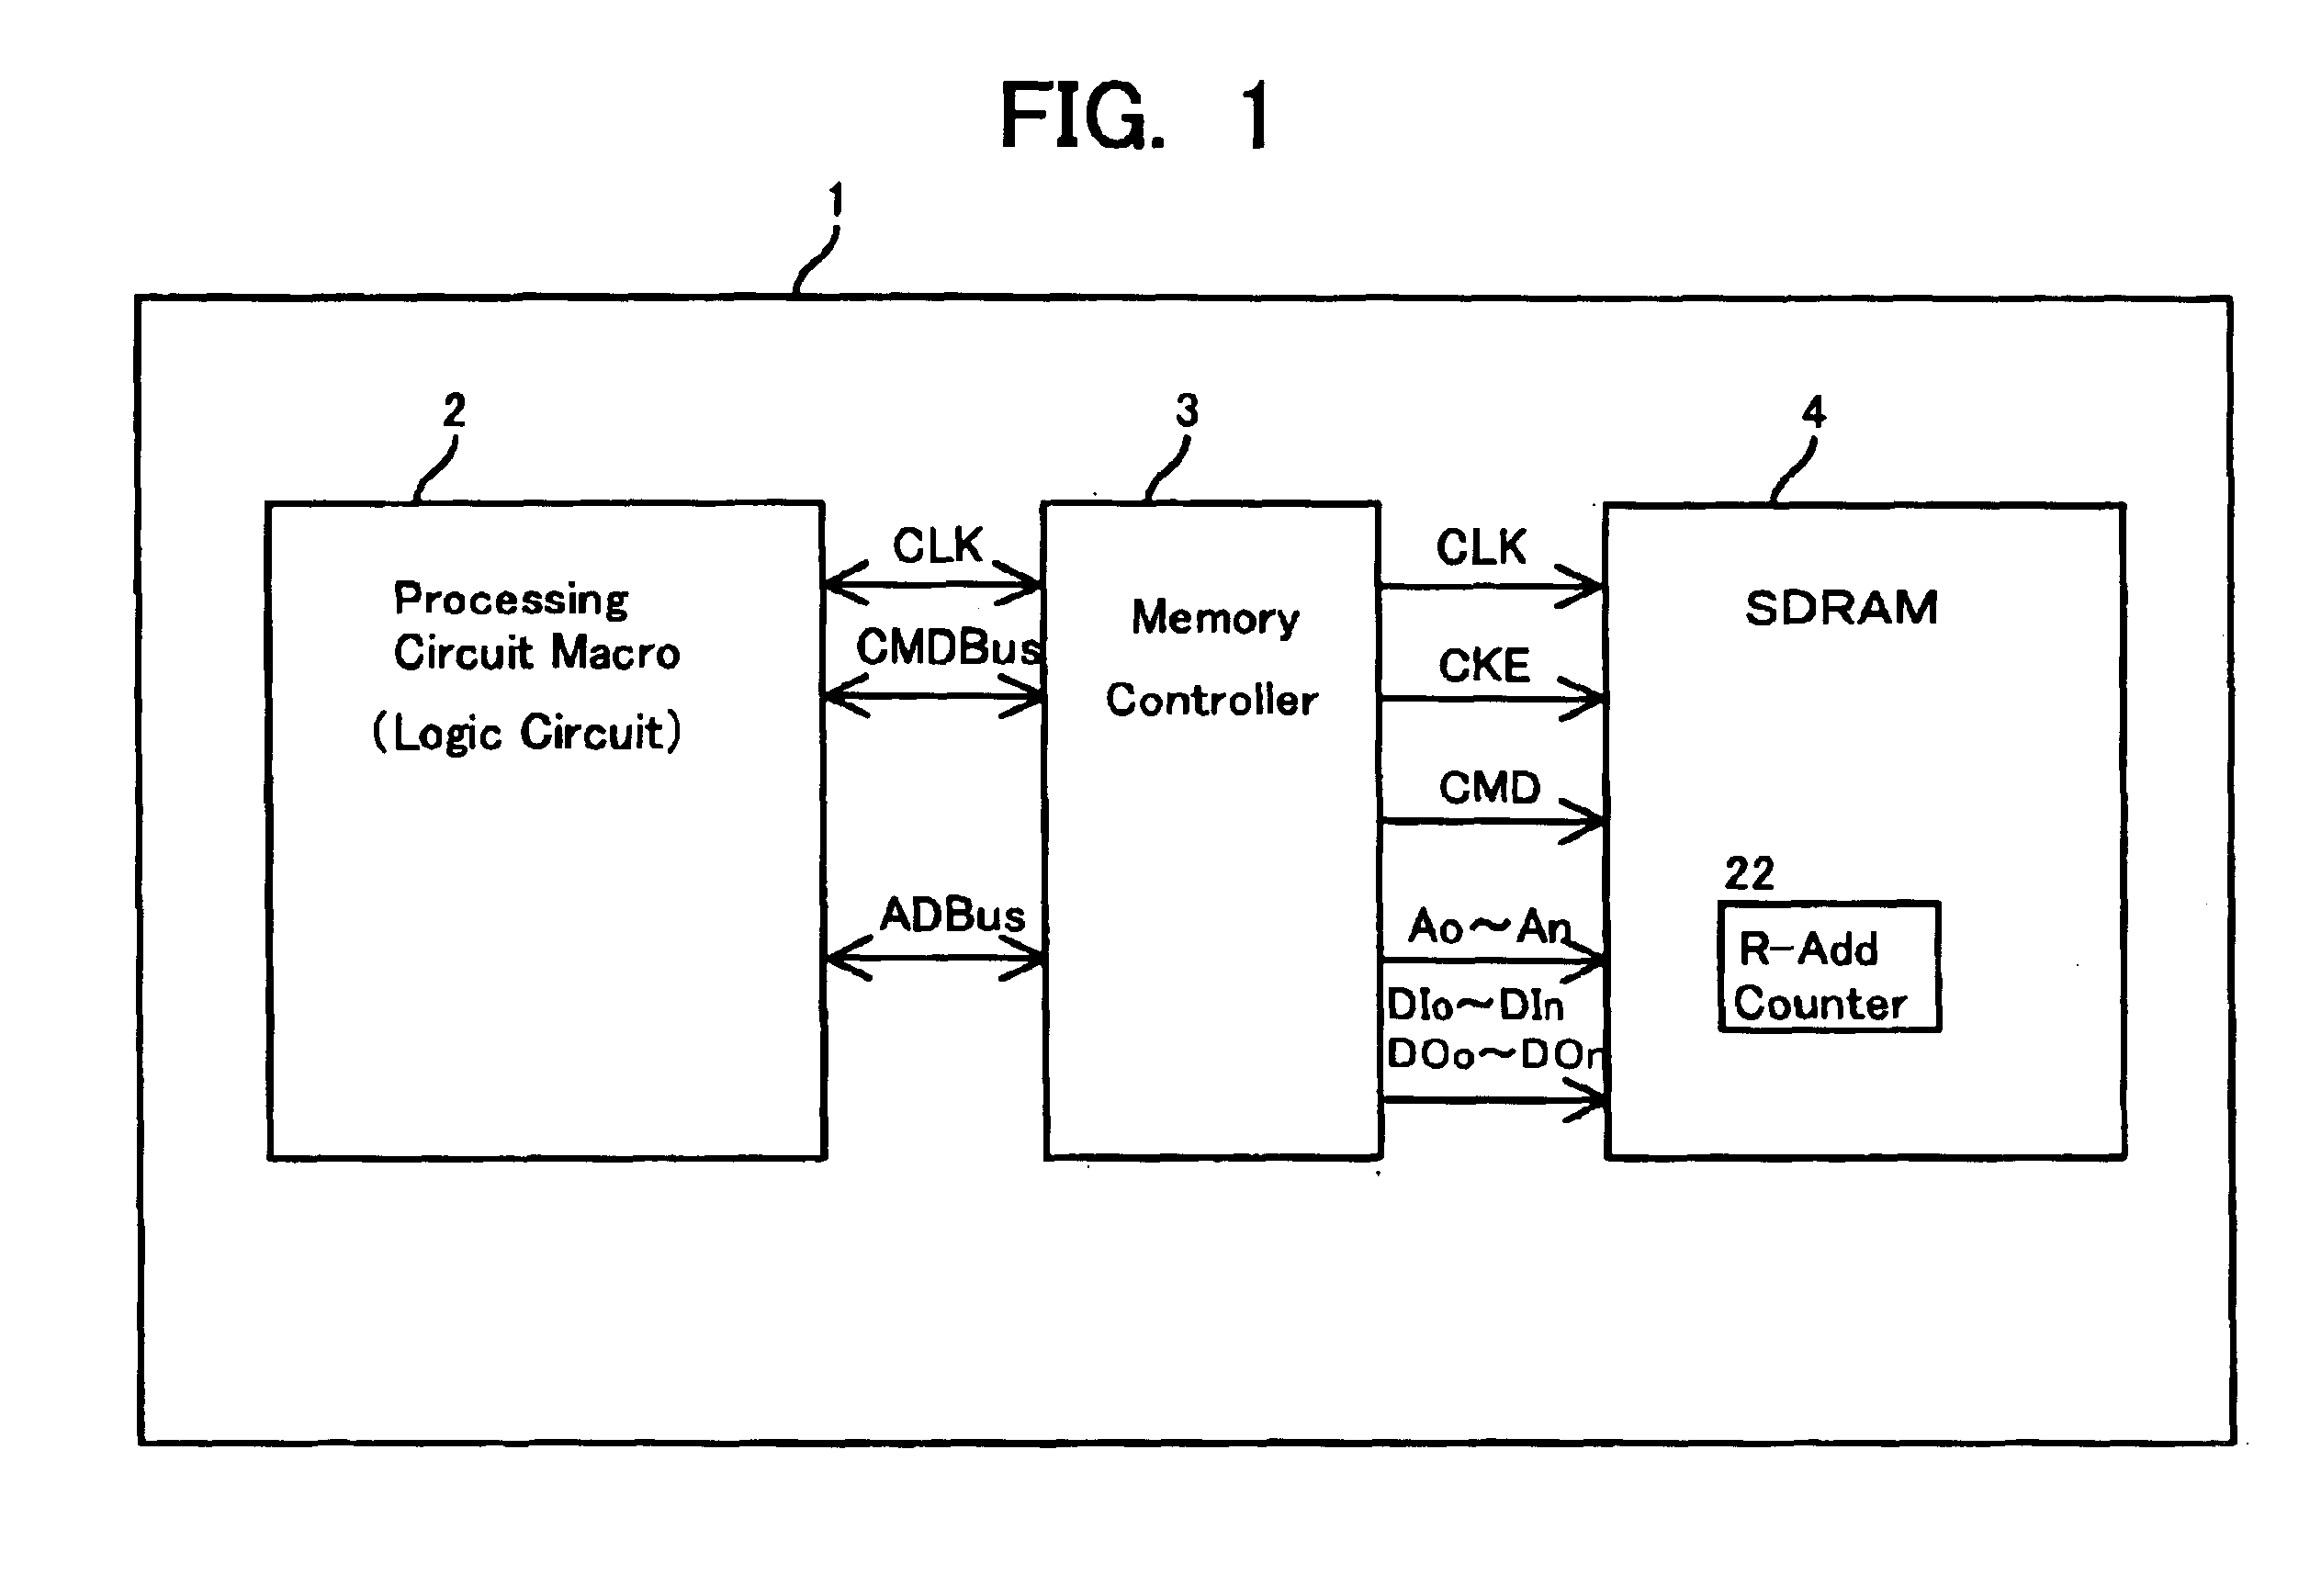 Clock synchronized dynamic memory and clock synchronized integrated circuit